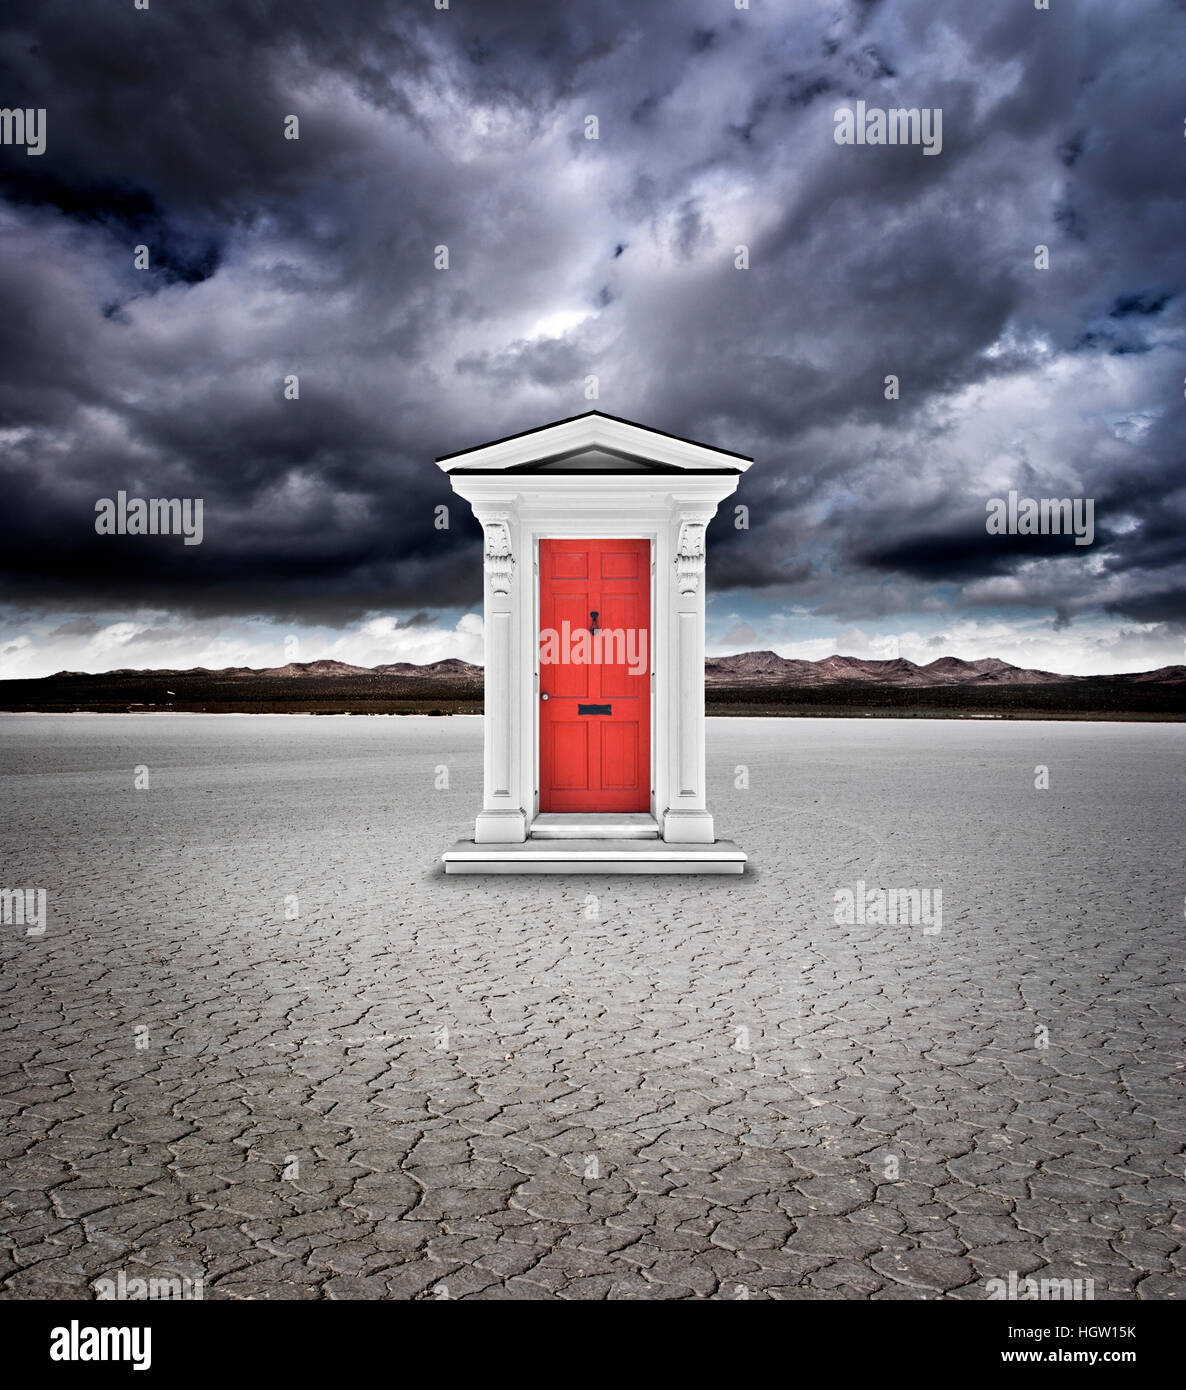 Digital Composite Of A Door In A Dry Lake Bed Under A Stormy Sky Stock Photo